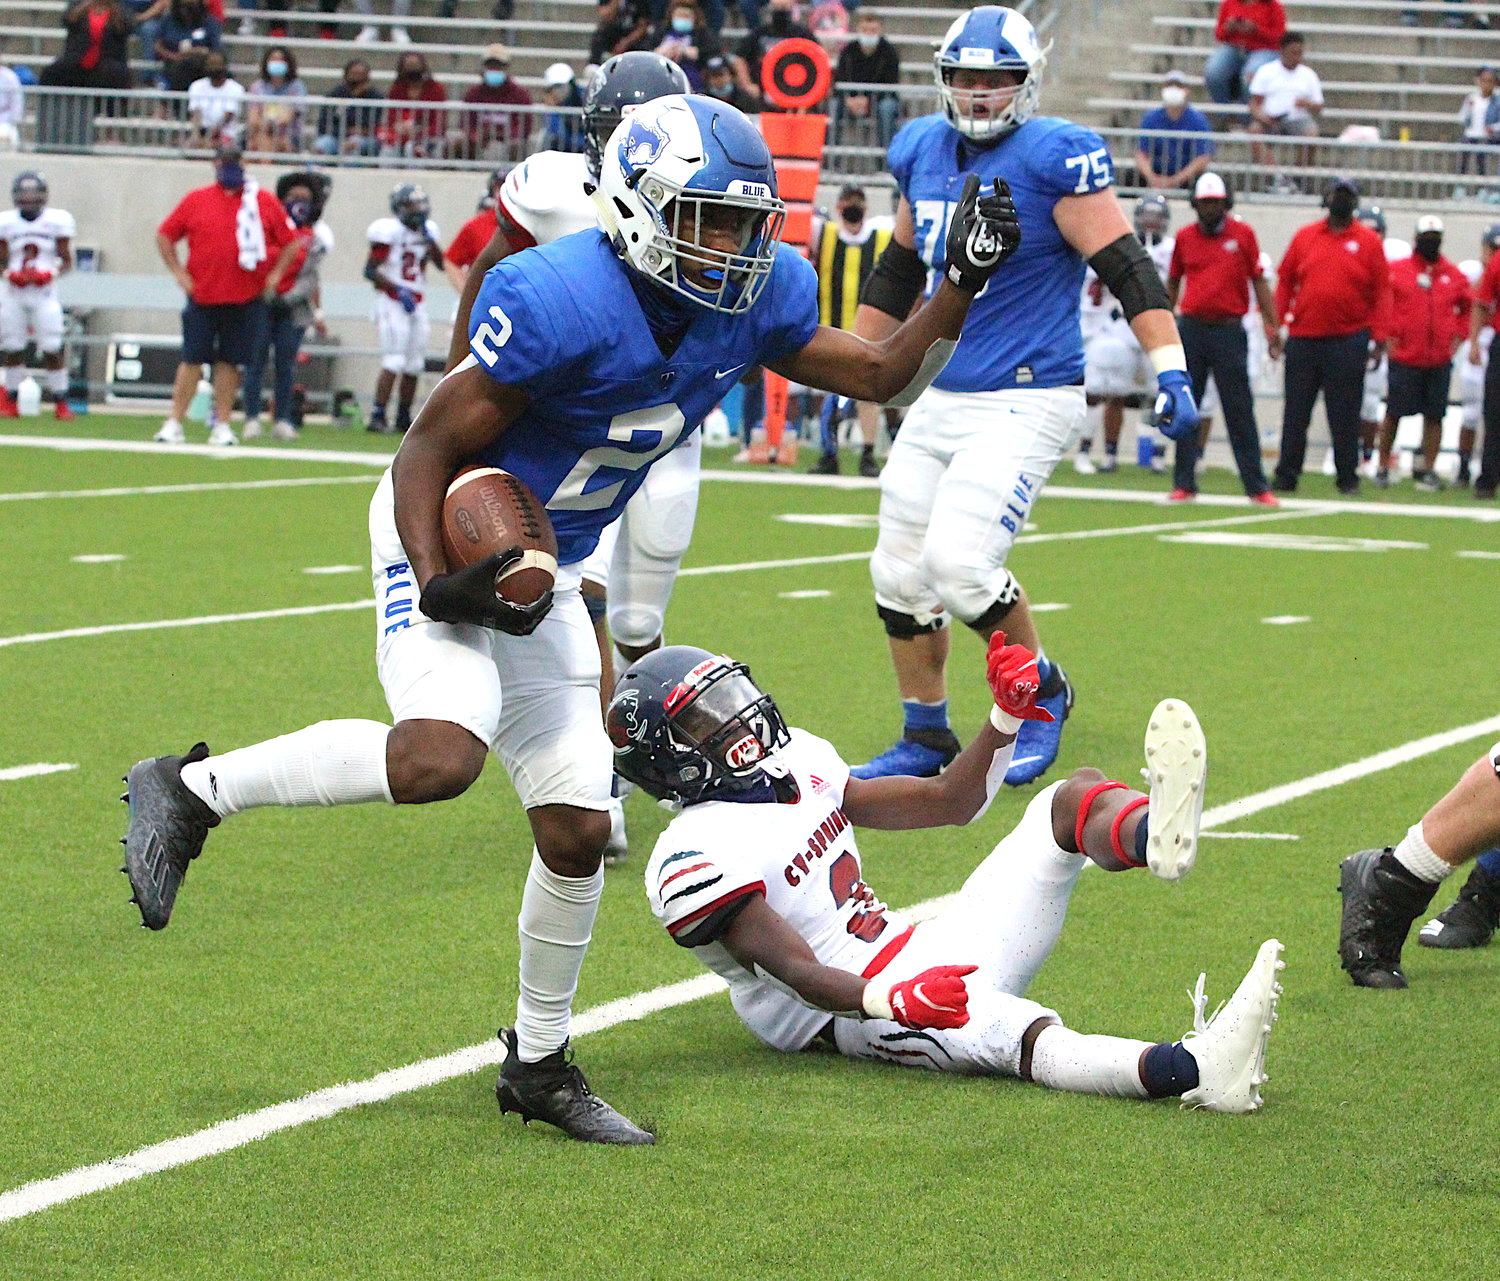 Taylor junior Michael Whitaker carries the ball during Thursday's game against Cy-Springs at Legacy Stadium.